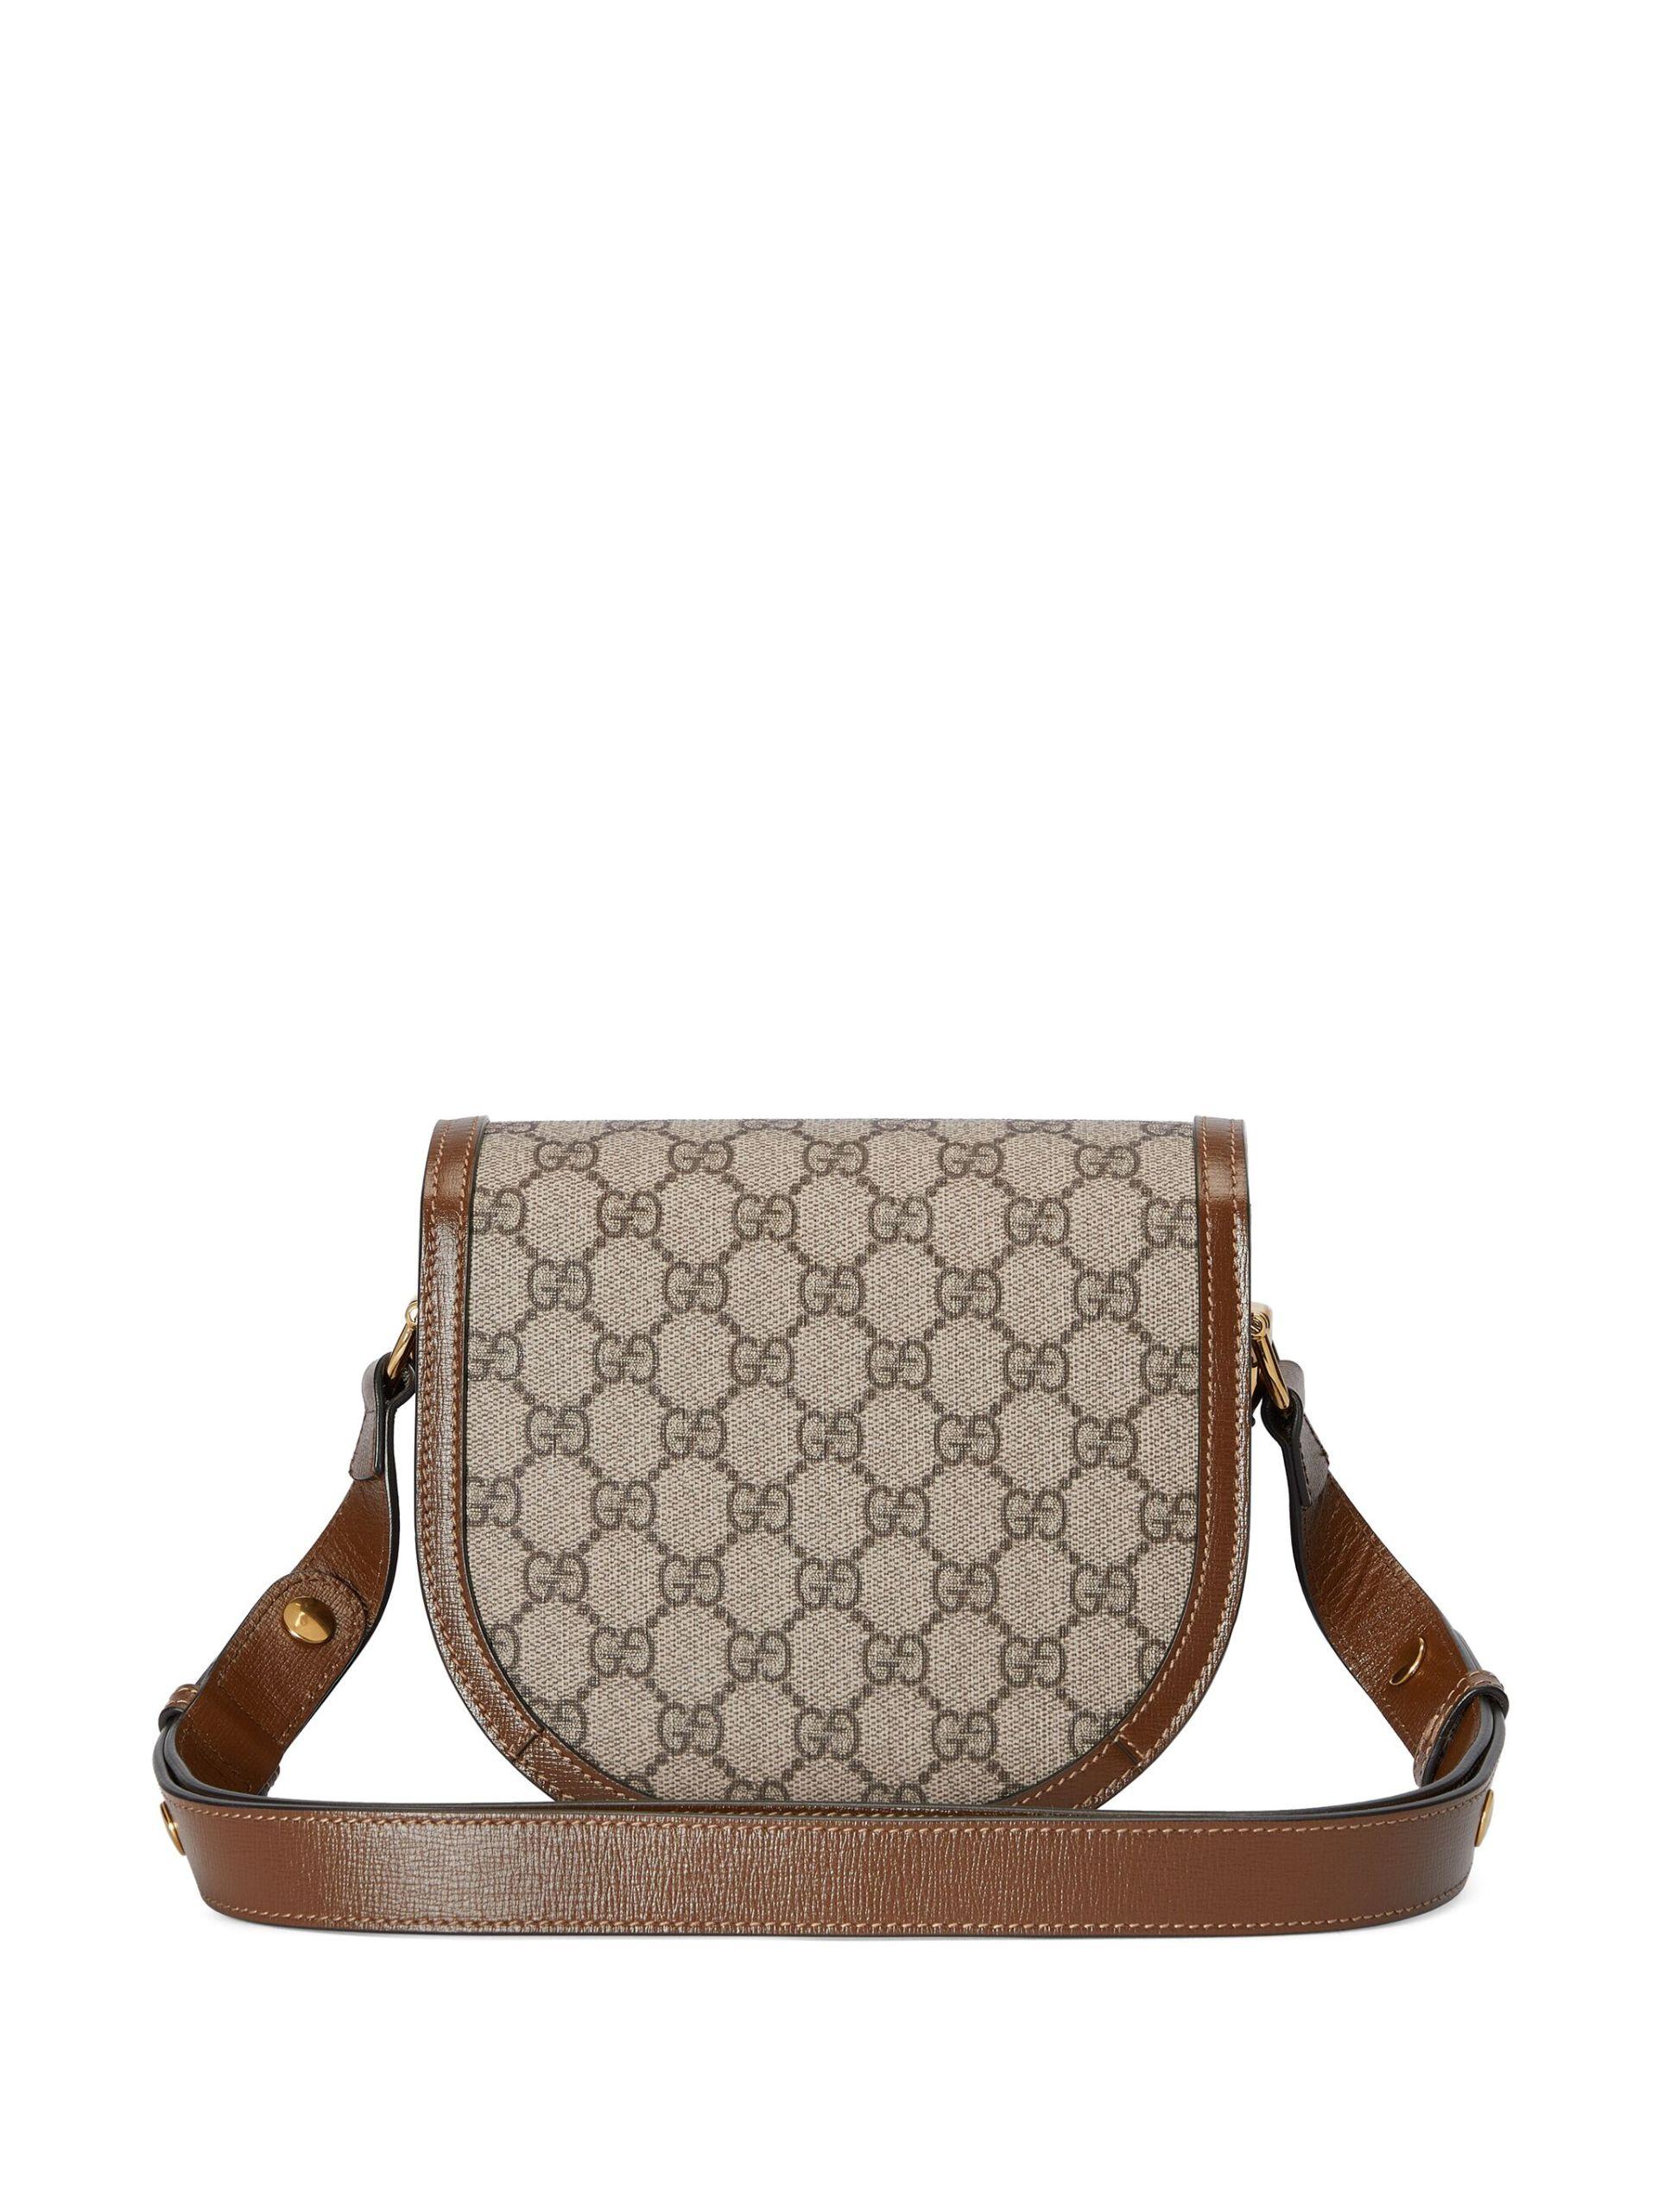 GUCCI Horsebit 1955 small leather-trimmed printed coated-canvas shoulder bag